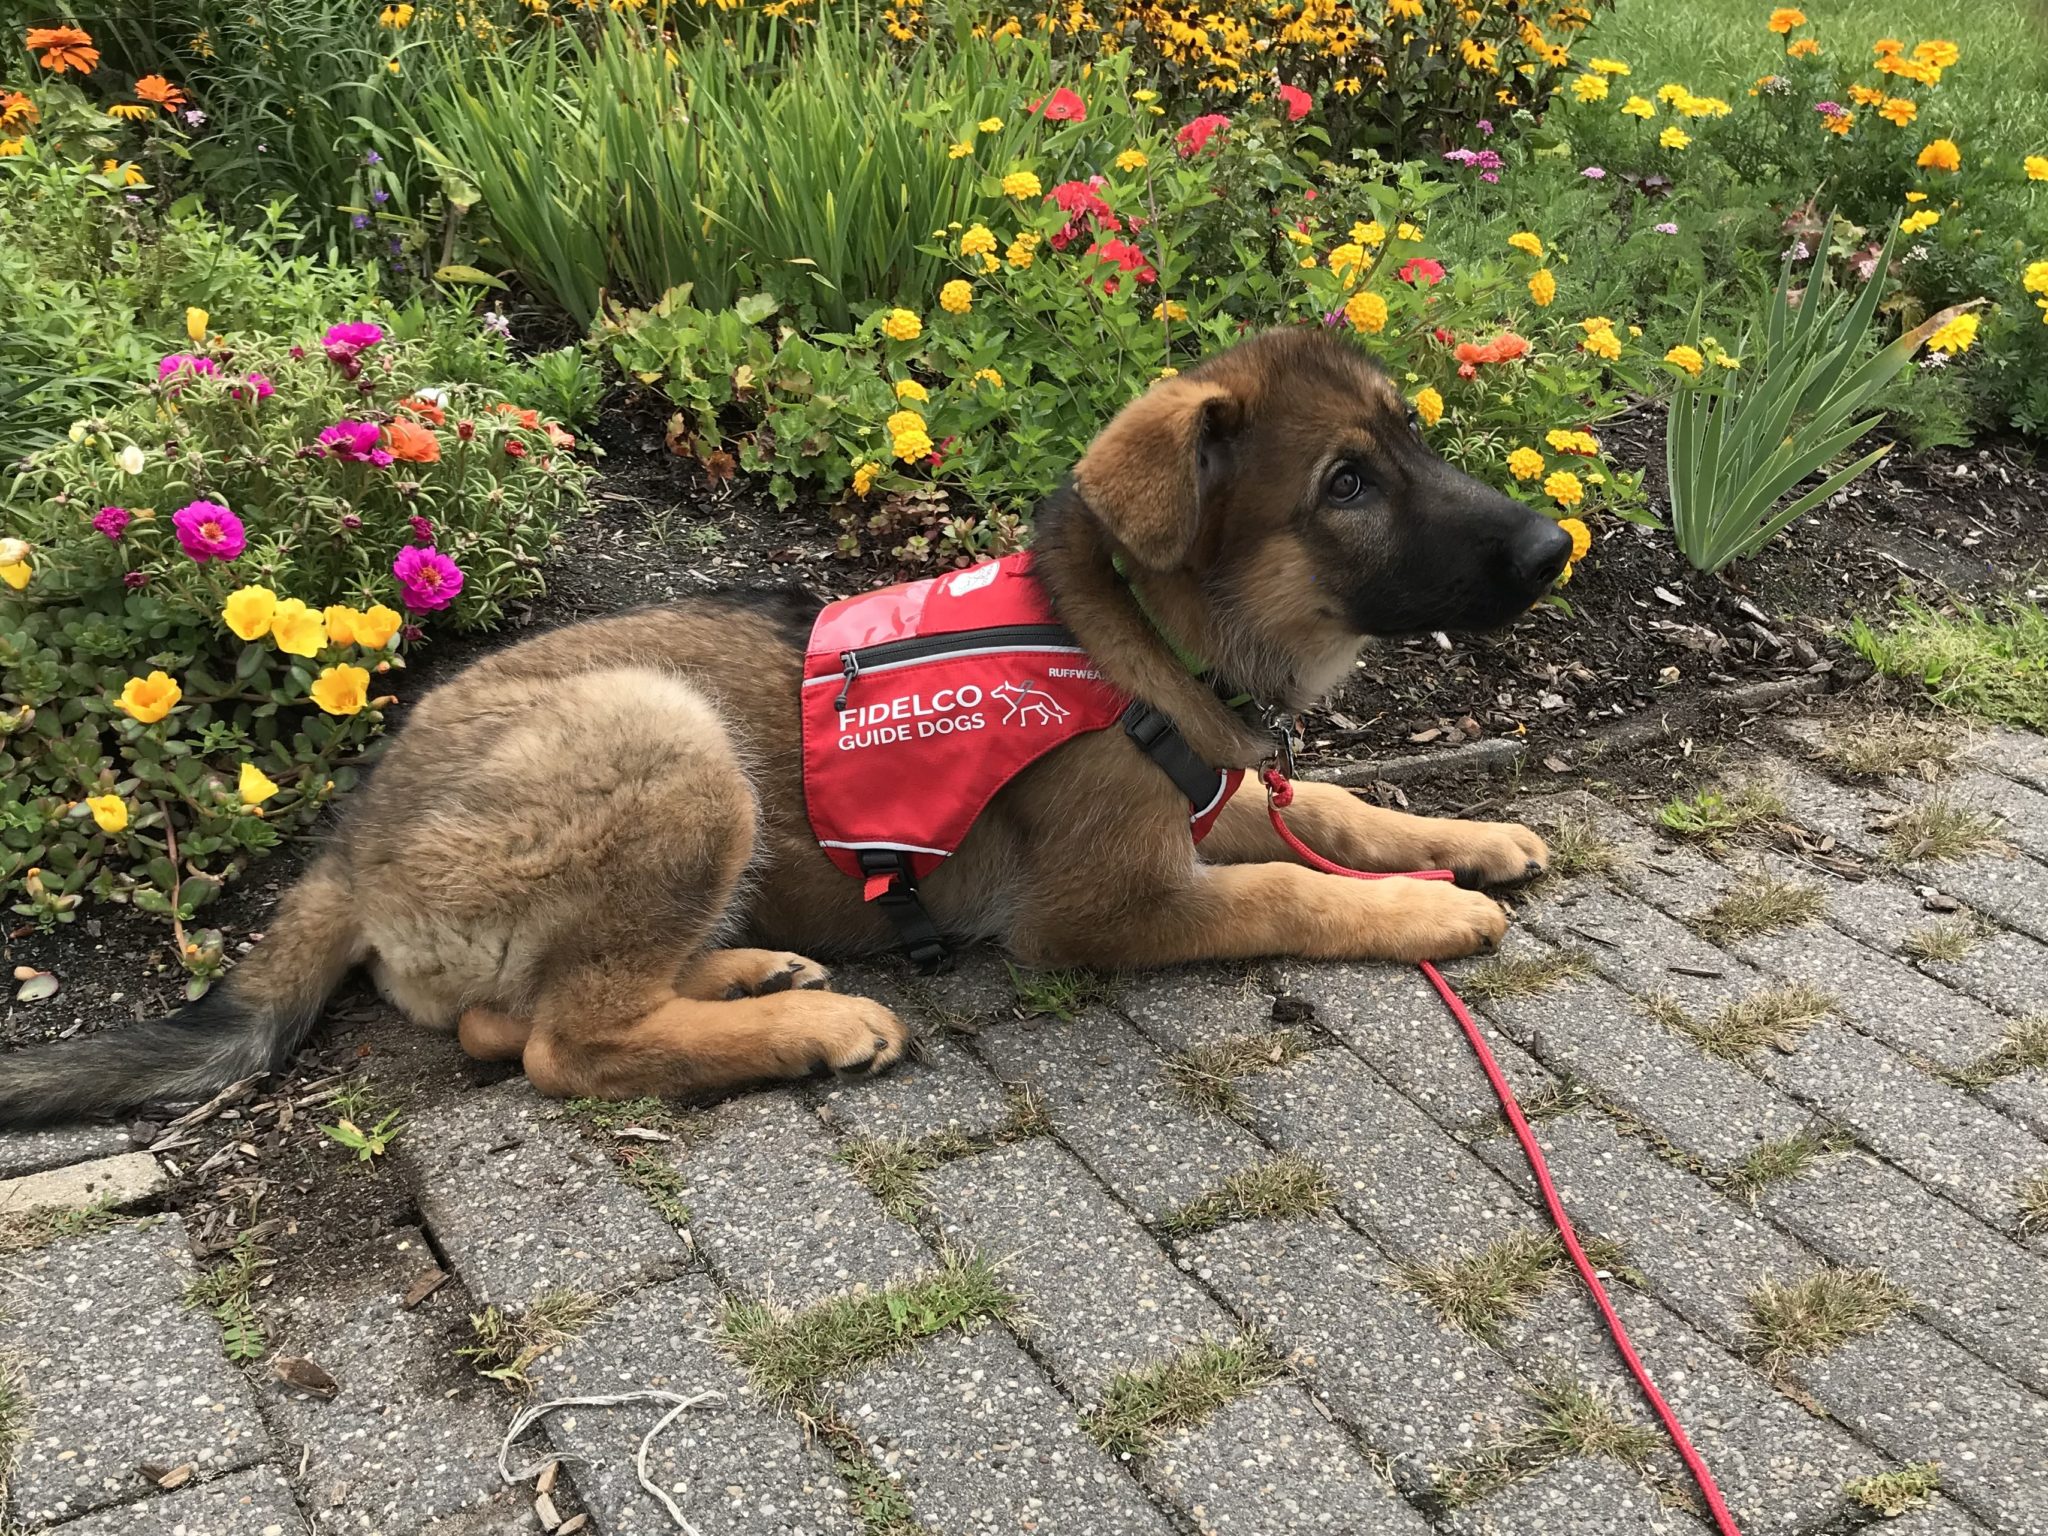 Fidelco guide dog puppy, Heidi with her ears down, lying in a red fidelco vest in front of spring flowers